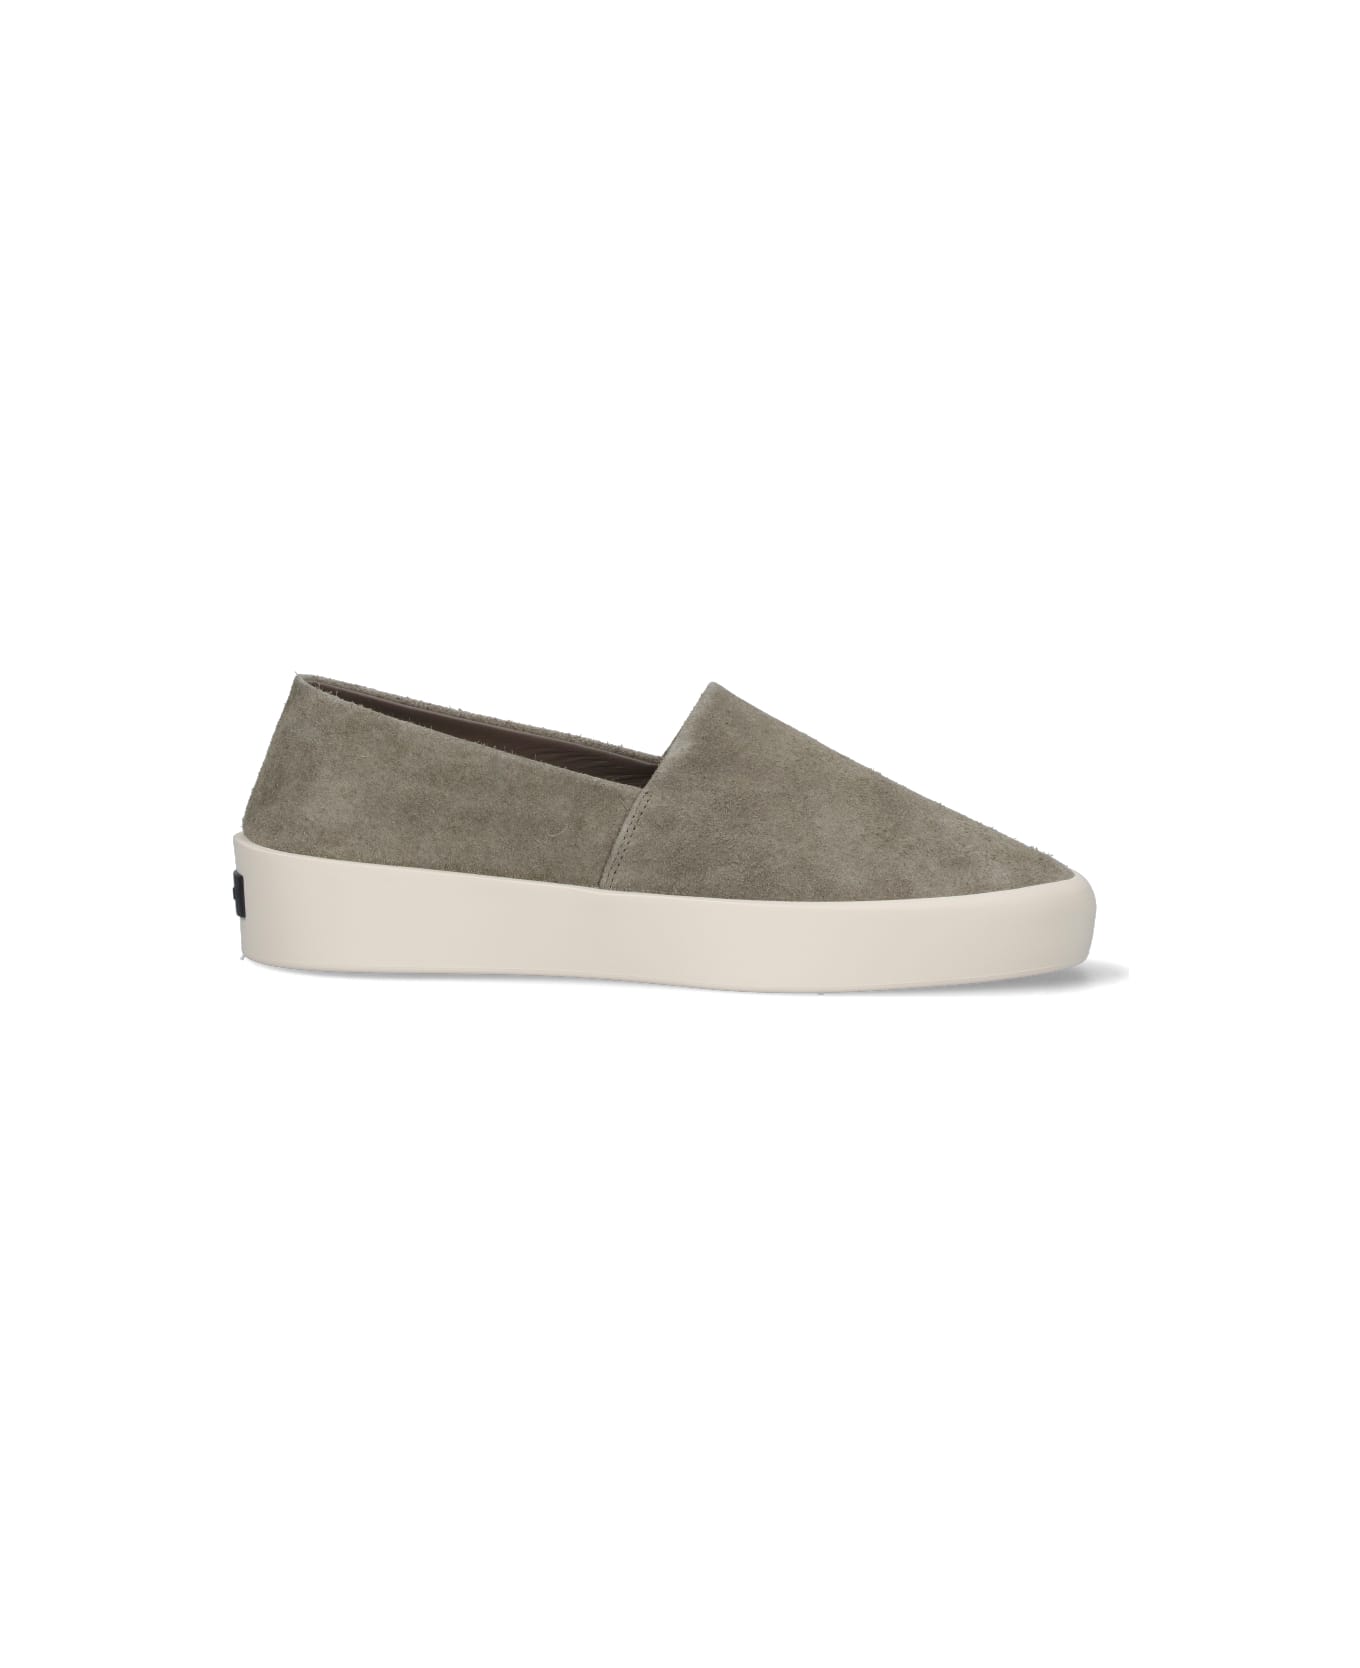 Fear of God Espadrilles Sneakers - Taupe